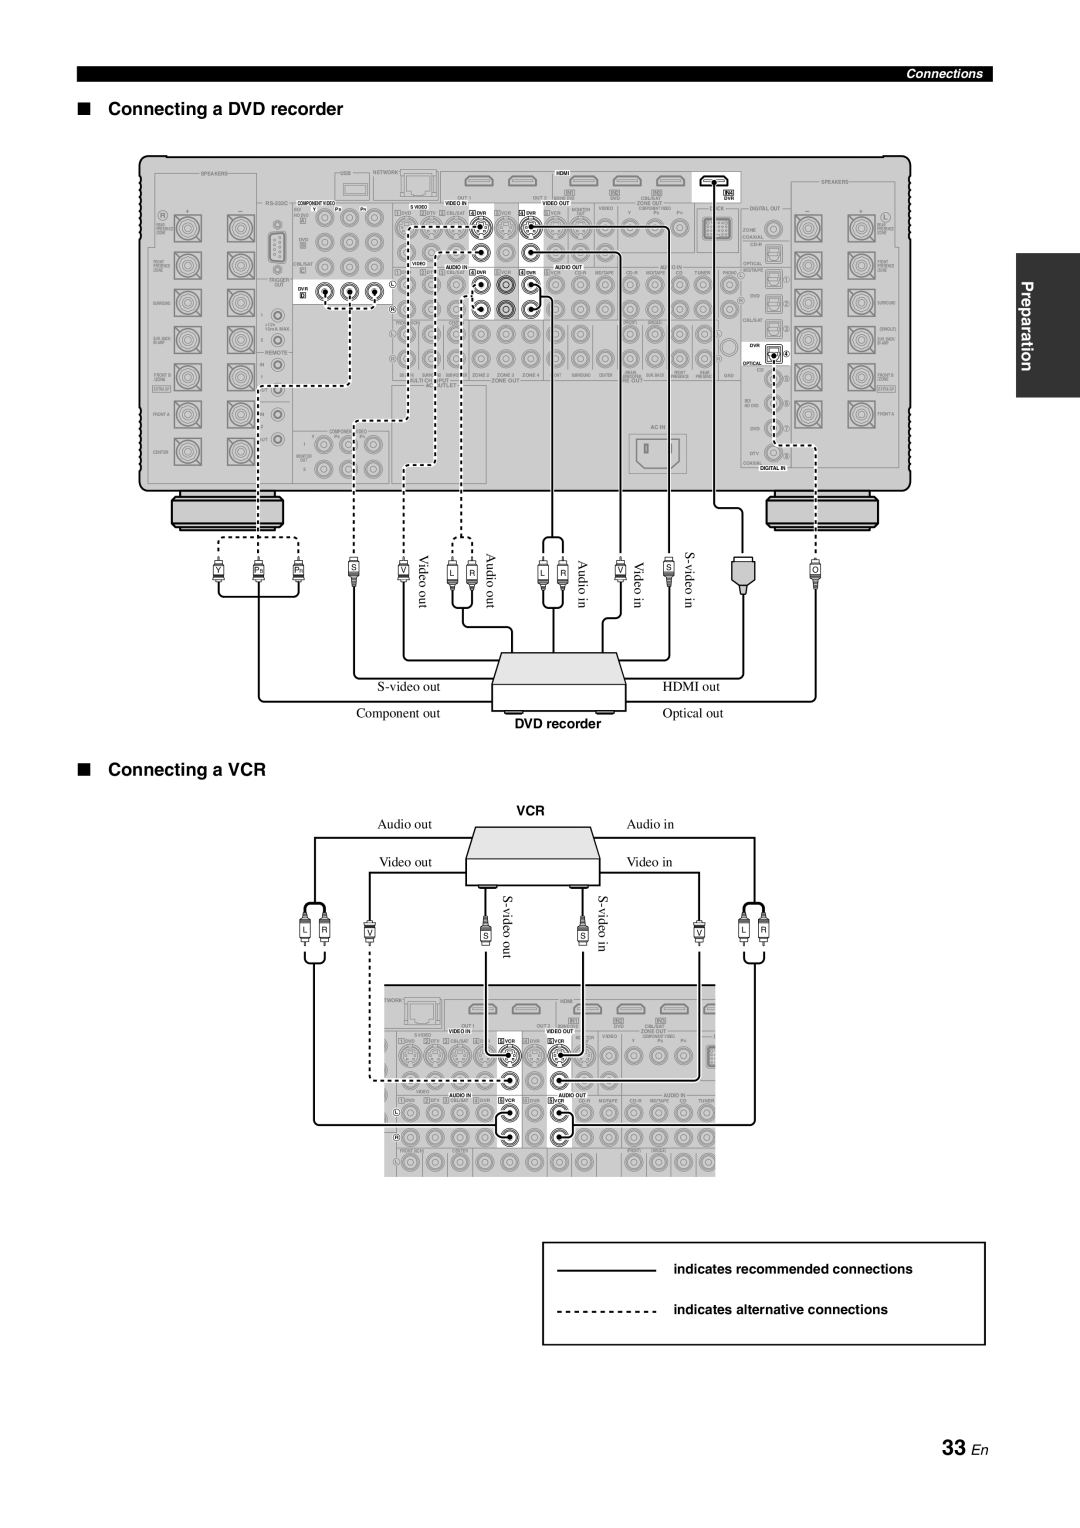 Yamaha DSP-Z11 owner manual 33 En, Connecting a DVD recorder, Connecting a VCR, Preparation, Connections 